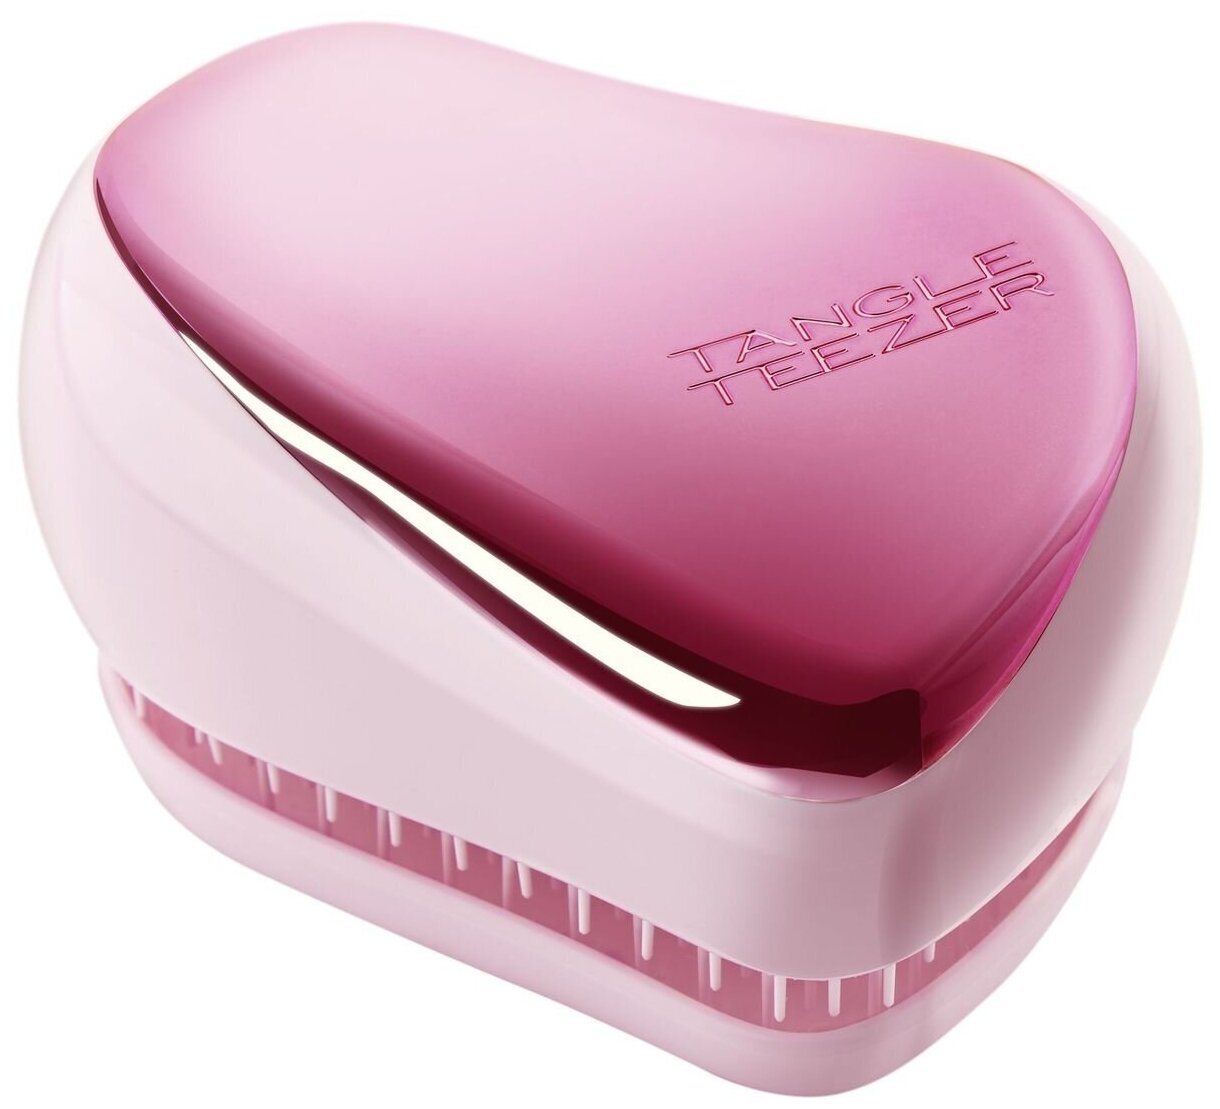  Tangle Teezer Compact Styler Baby Doll Pink Chrome